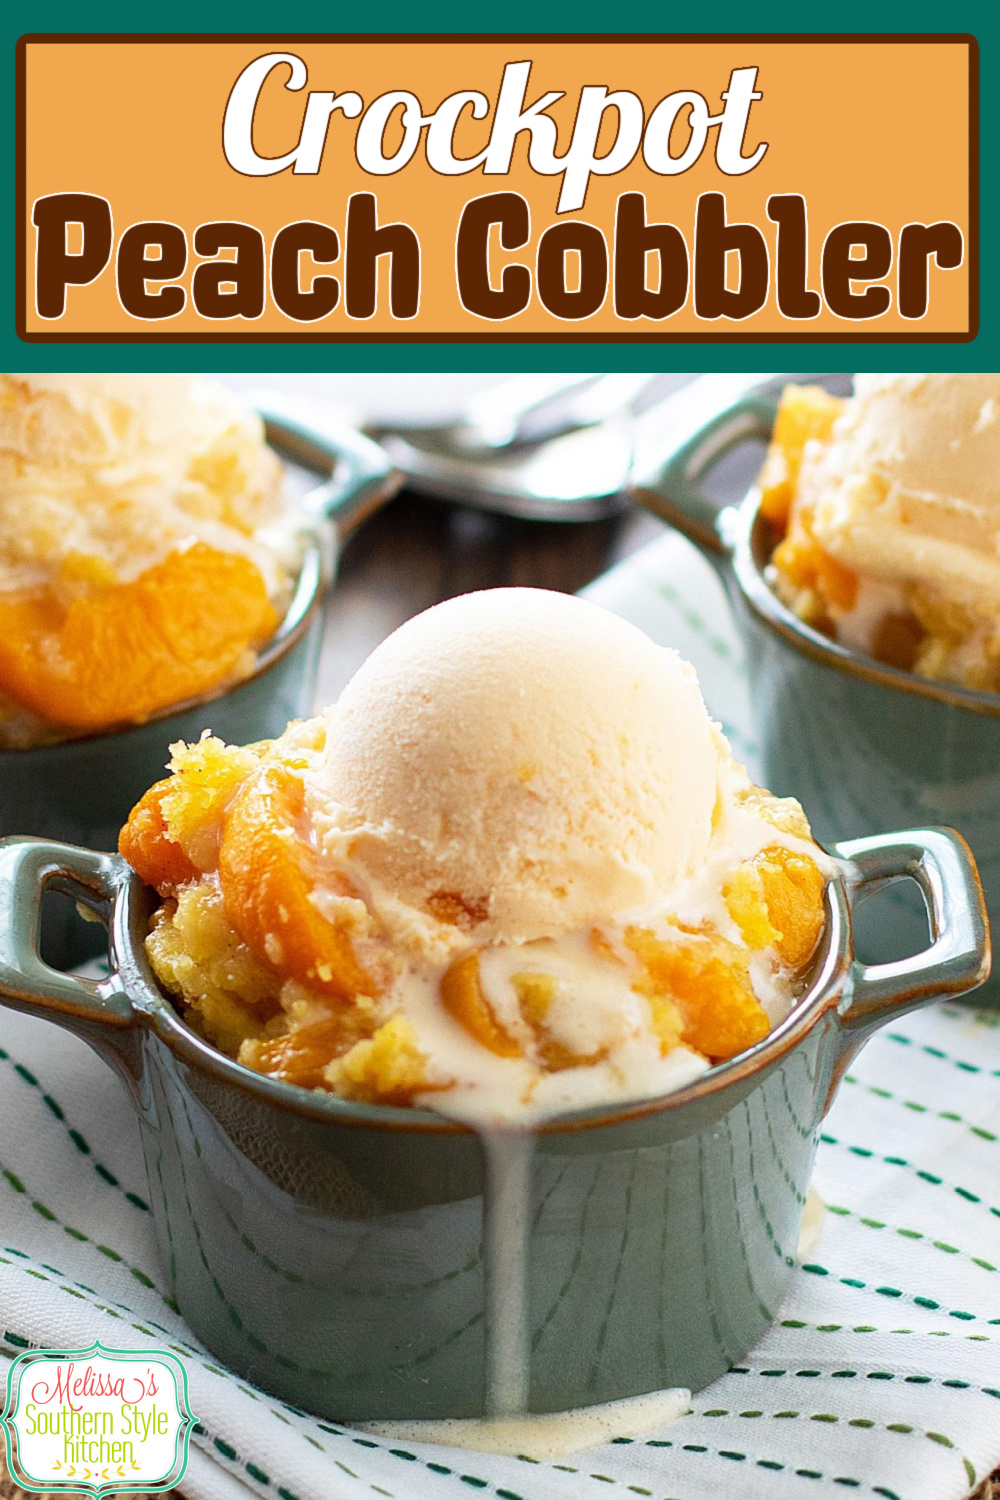 Enjoy a heaping helping of this Crockpot Peach Cobbler with a big scoop of vanilla ice cream for a warm and cozy dessert #peachcobbler #cobblerrecipes #peaches #peachdesserts #crockpotpeachcobbler #slowcookedpeachcobbler #crockpotrecipes #cakemixhack #desserts #dessertfoodrecipes #southernfood #southernrecipes via @melissasssk